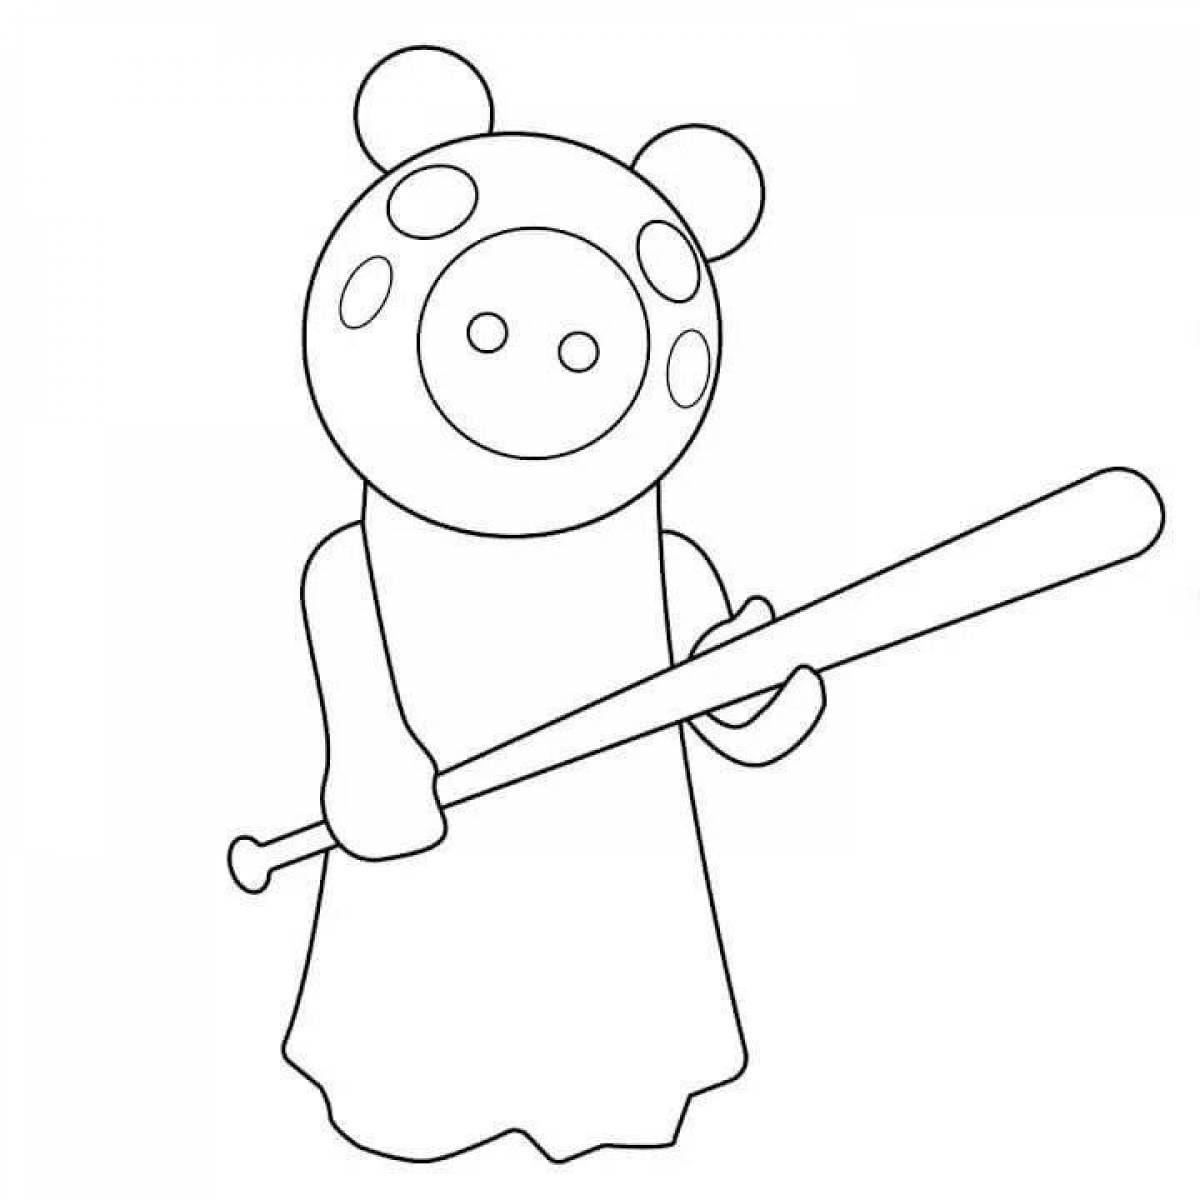 Color-frenzy roblox piggy coloring page